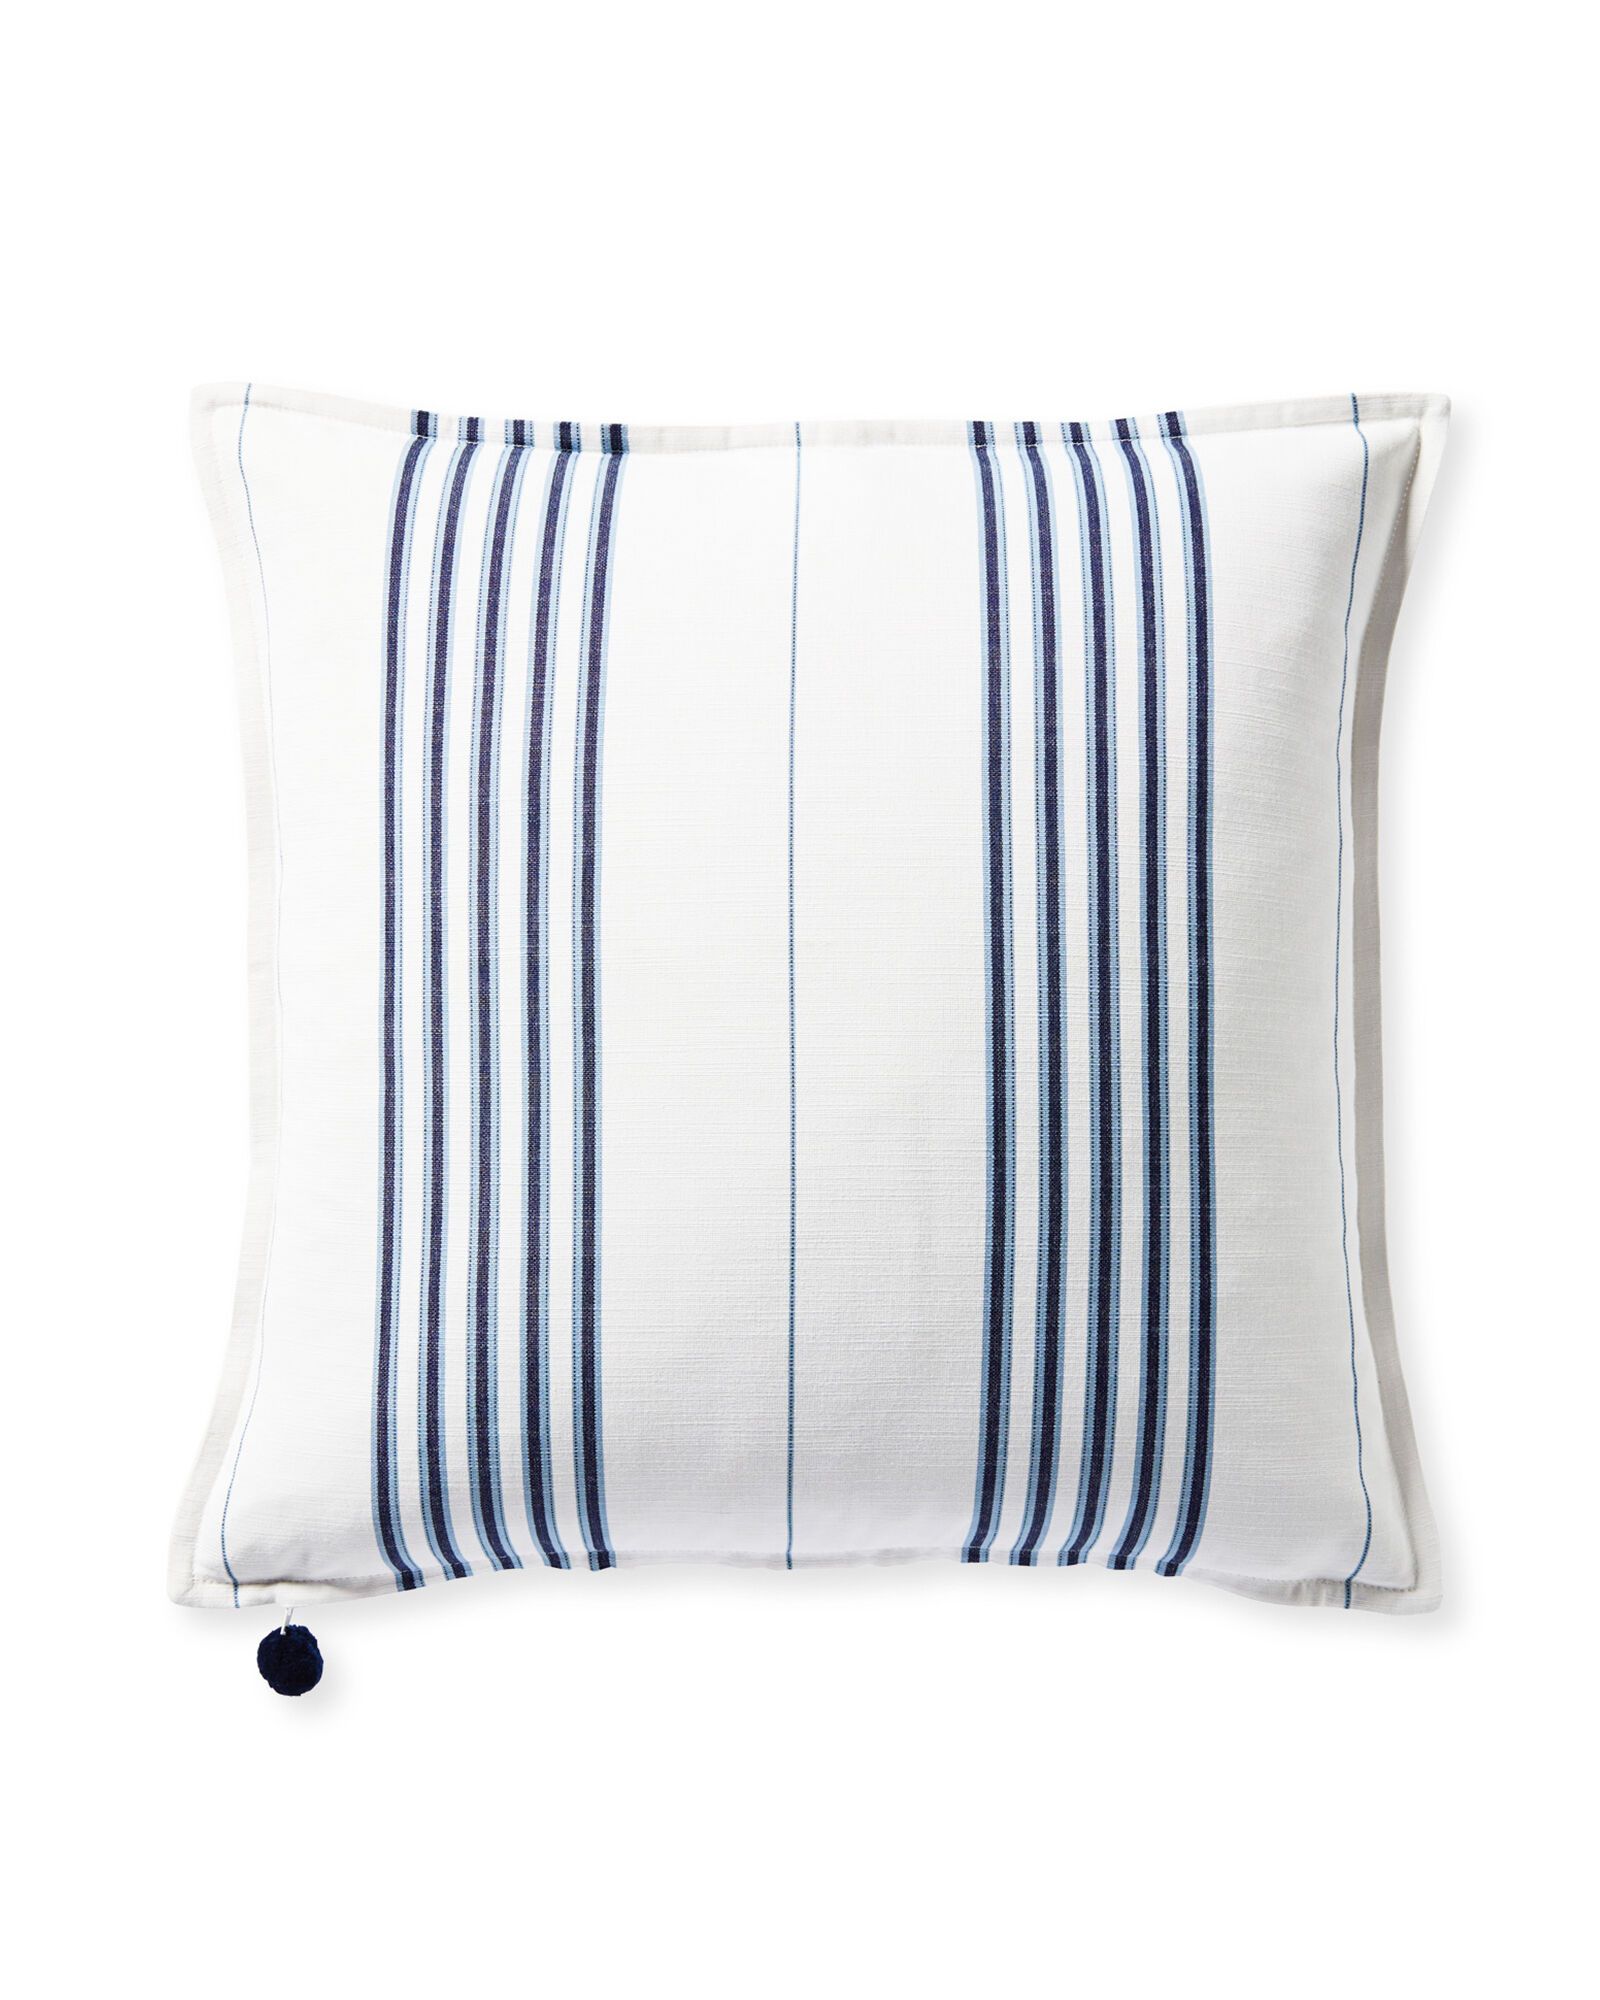 Perennials® Lake Stripe Pillow Cover | Serena and Lily